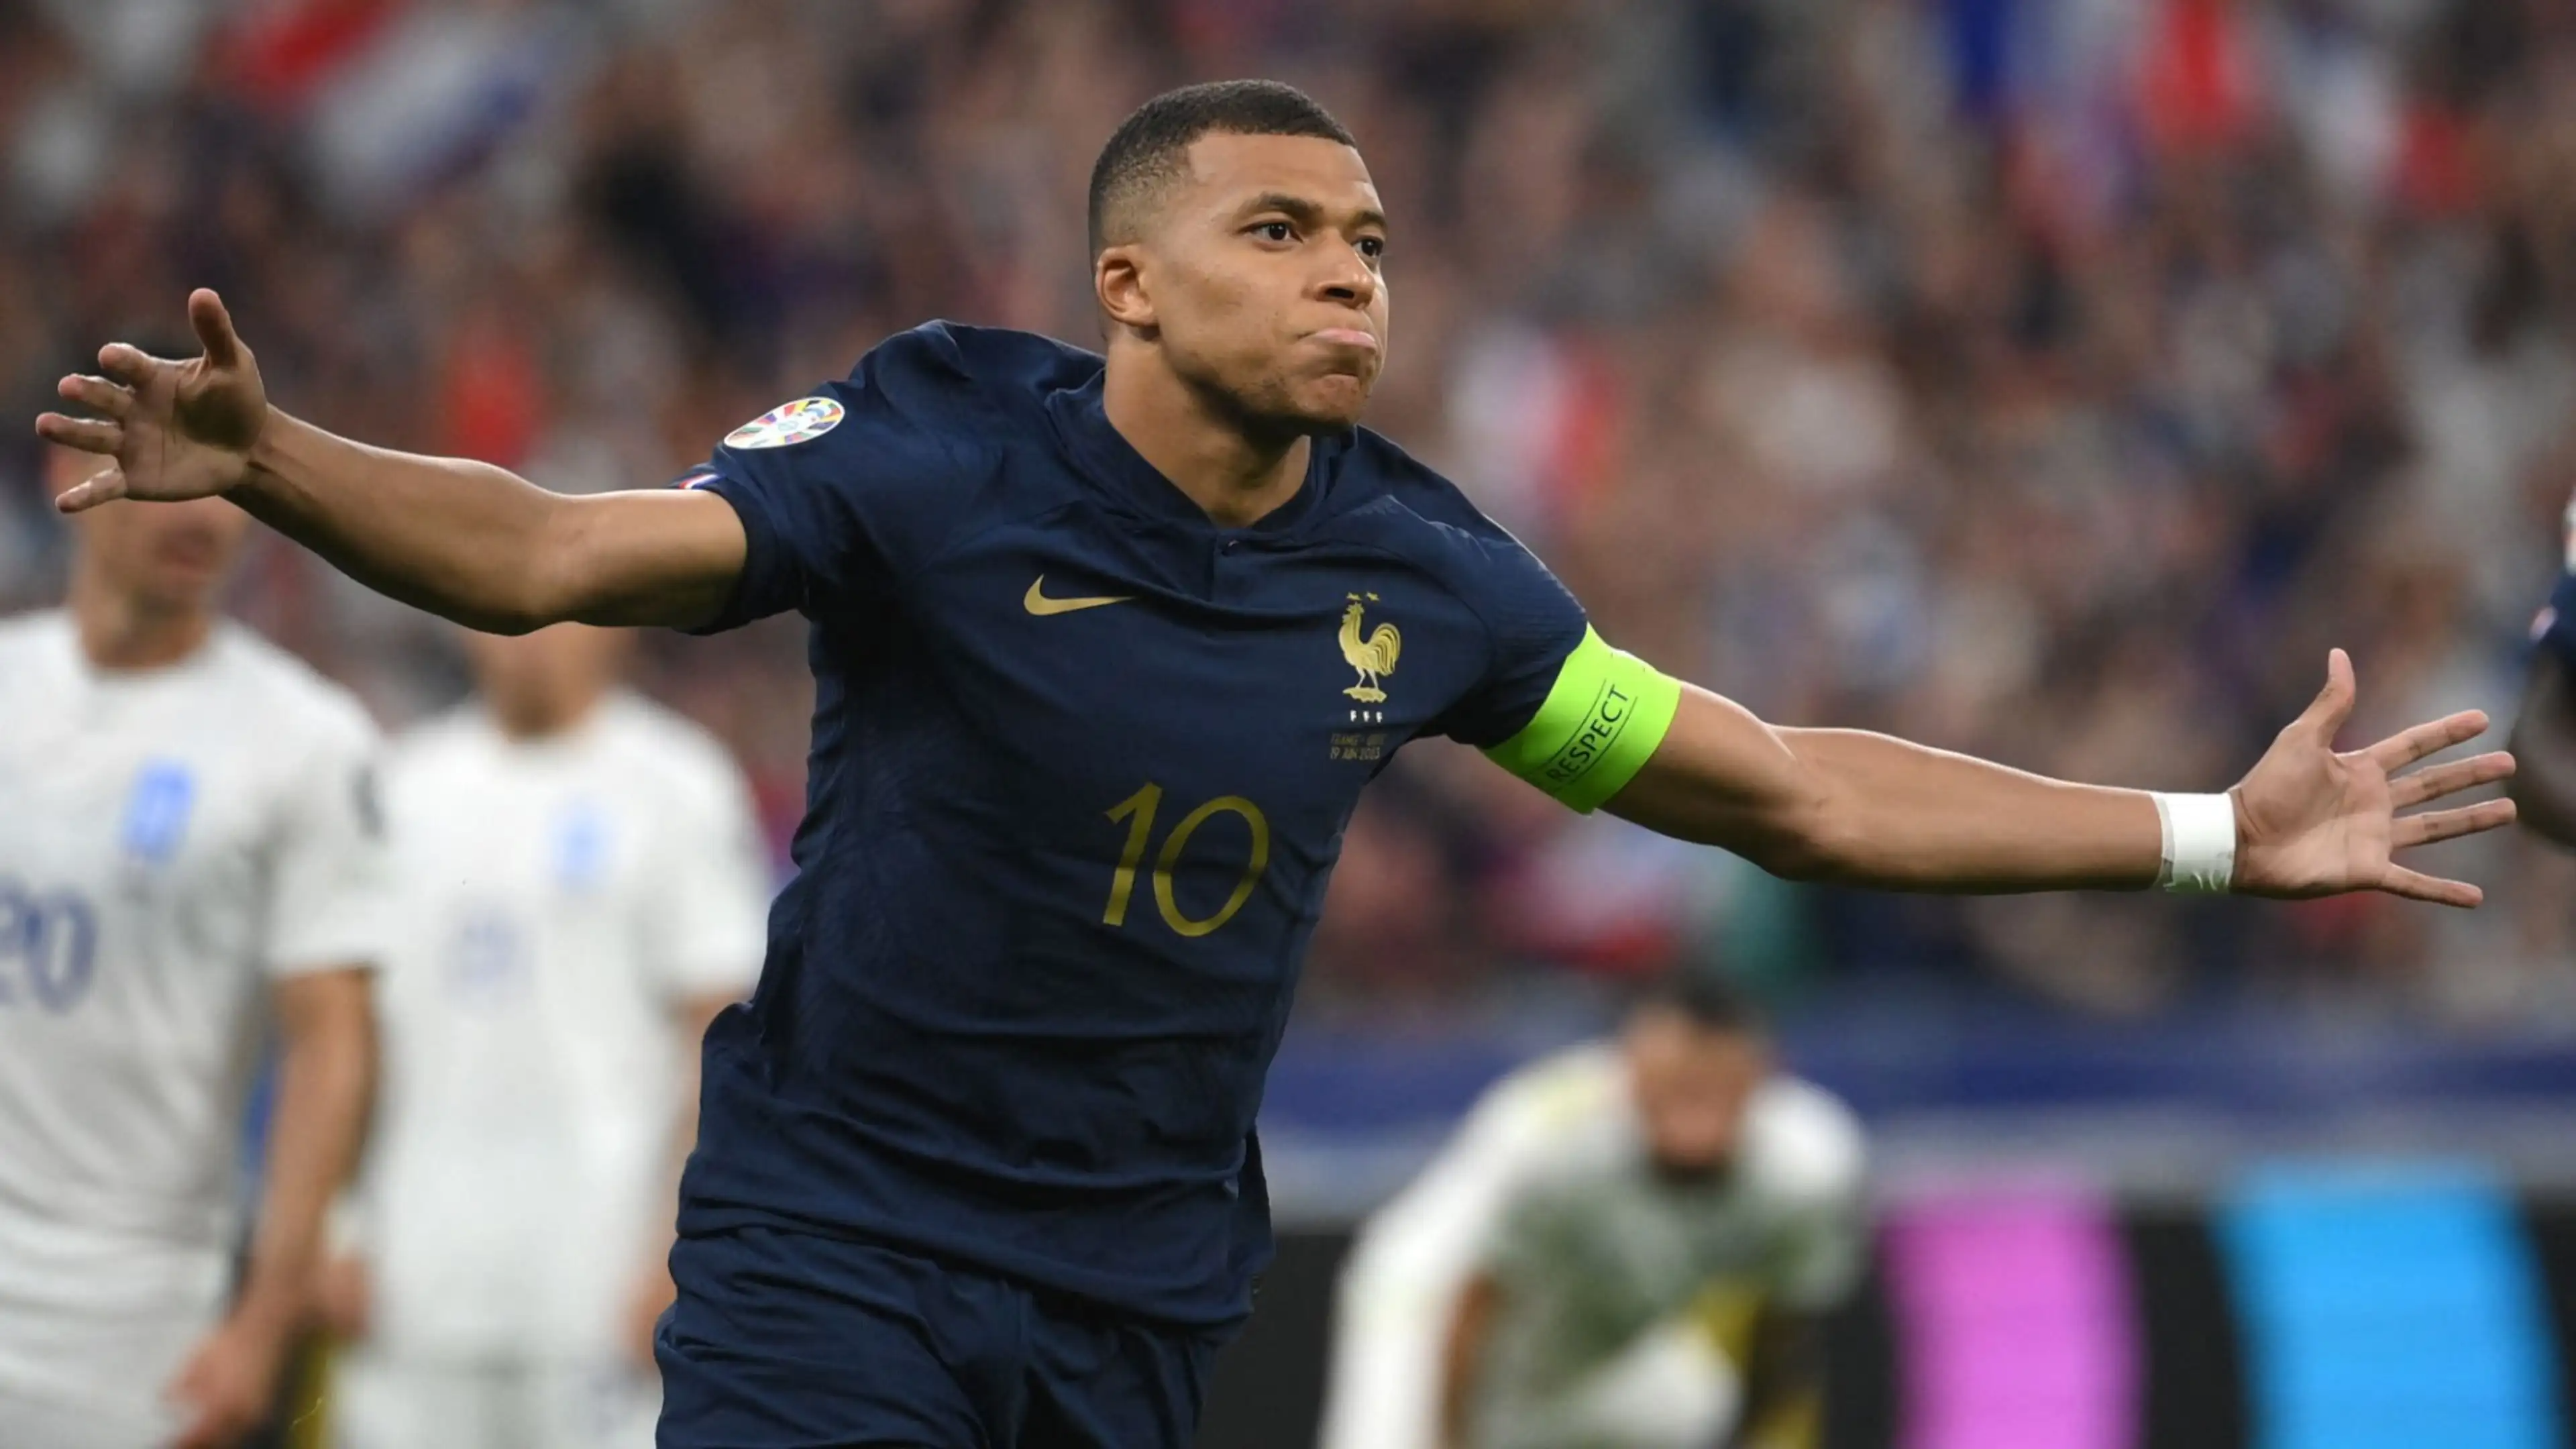 PSG Wants to Sell Mbappé for at Least €200 Million